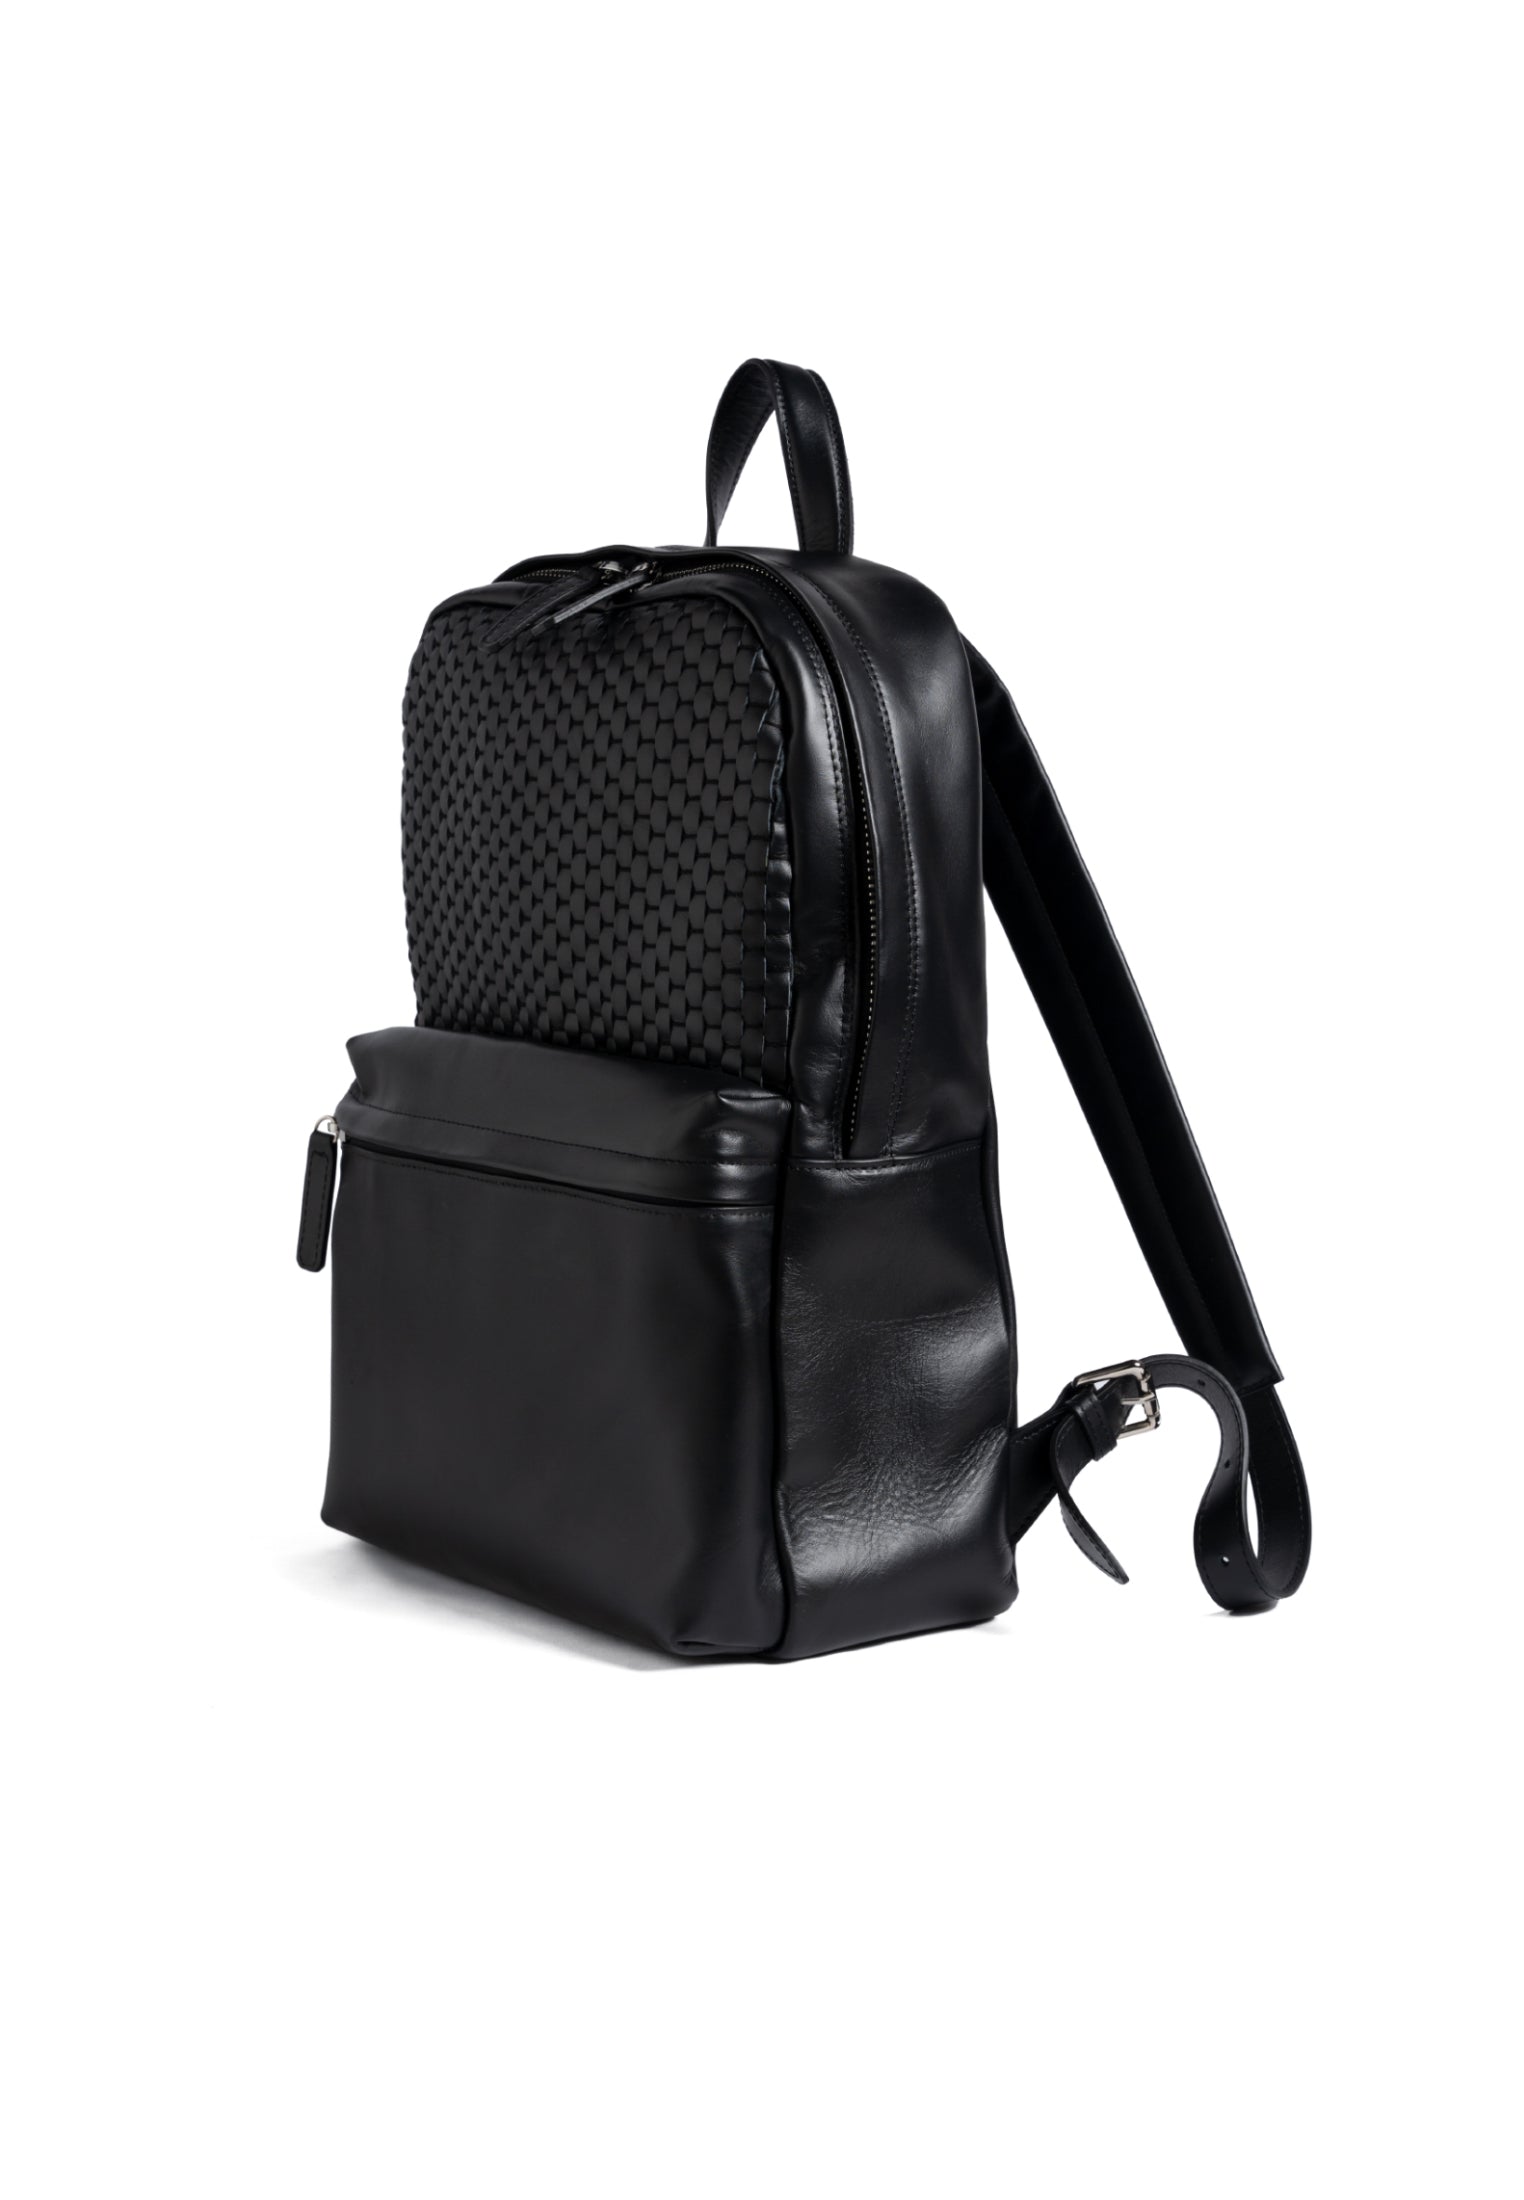 Parise 93Min Woven Leather Backpack